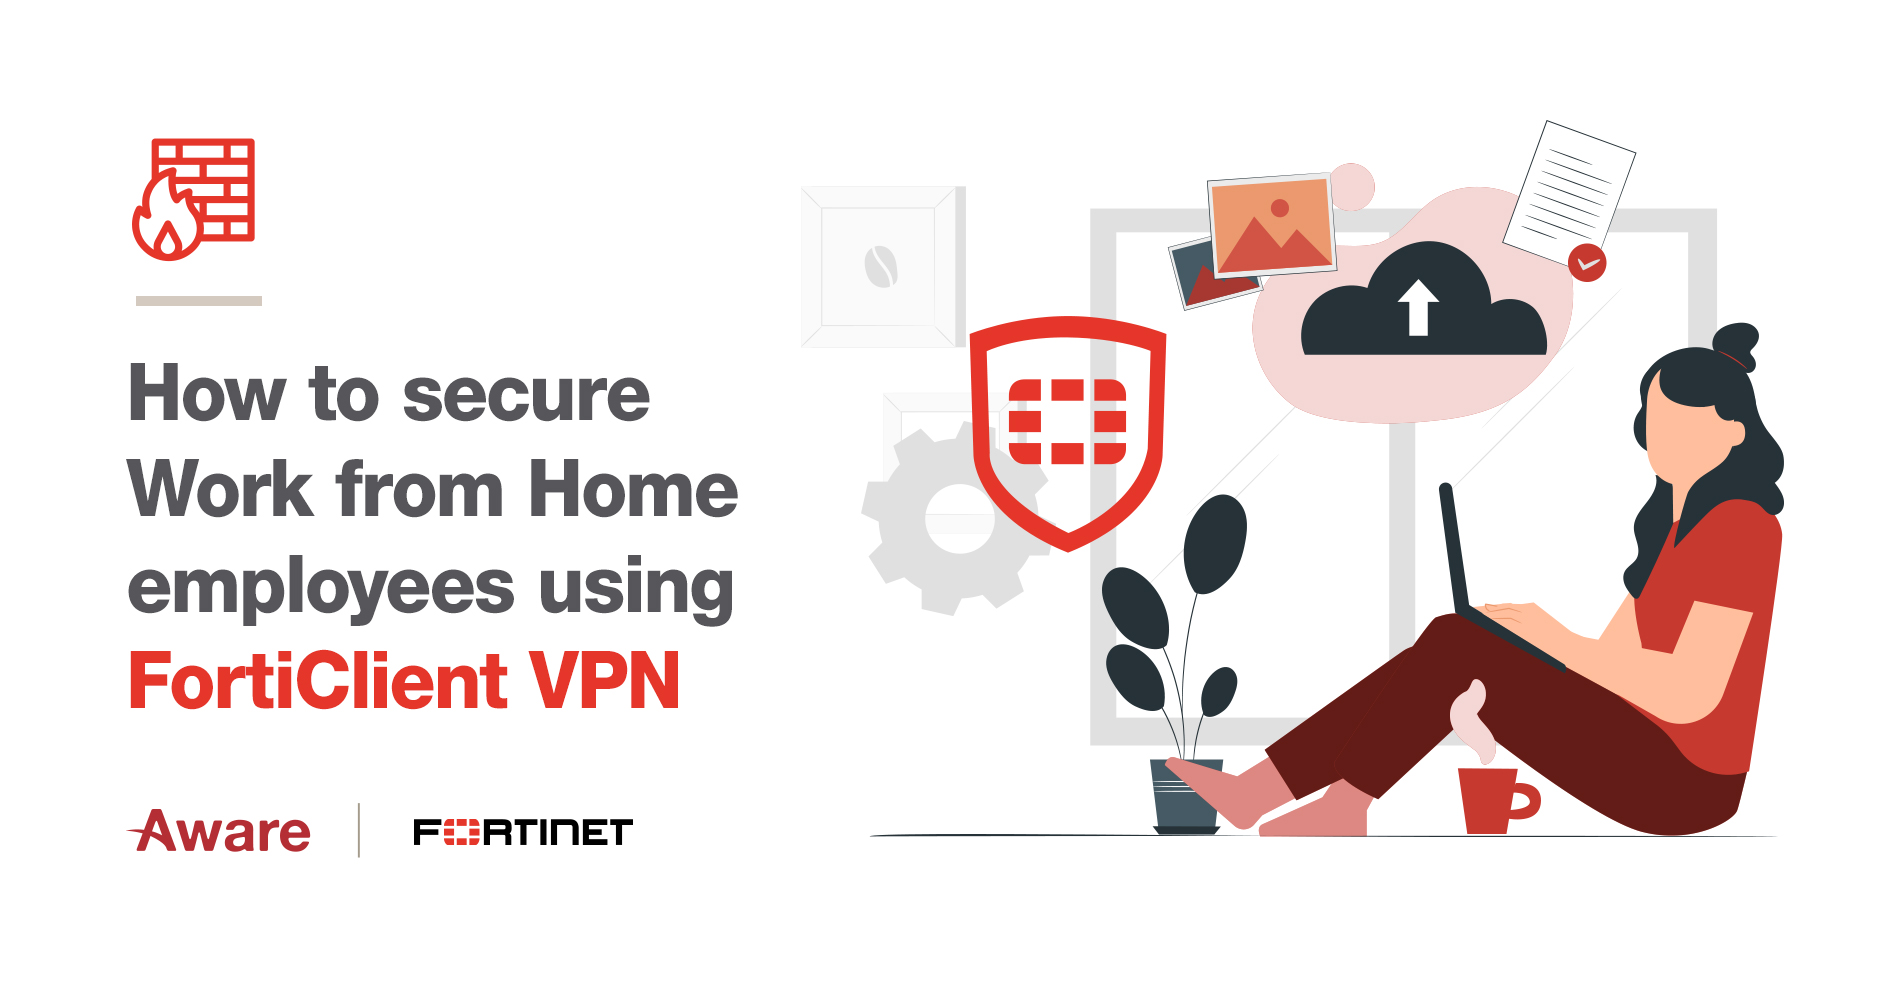 How to secure work from home employees using FortiClient VPN